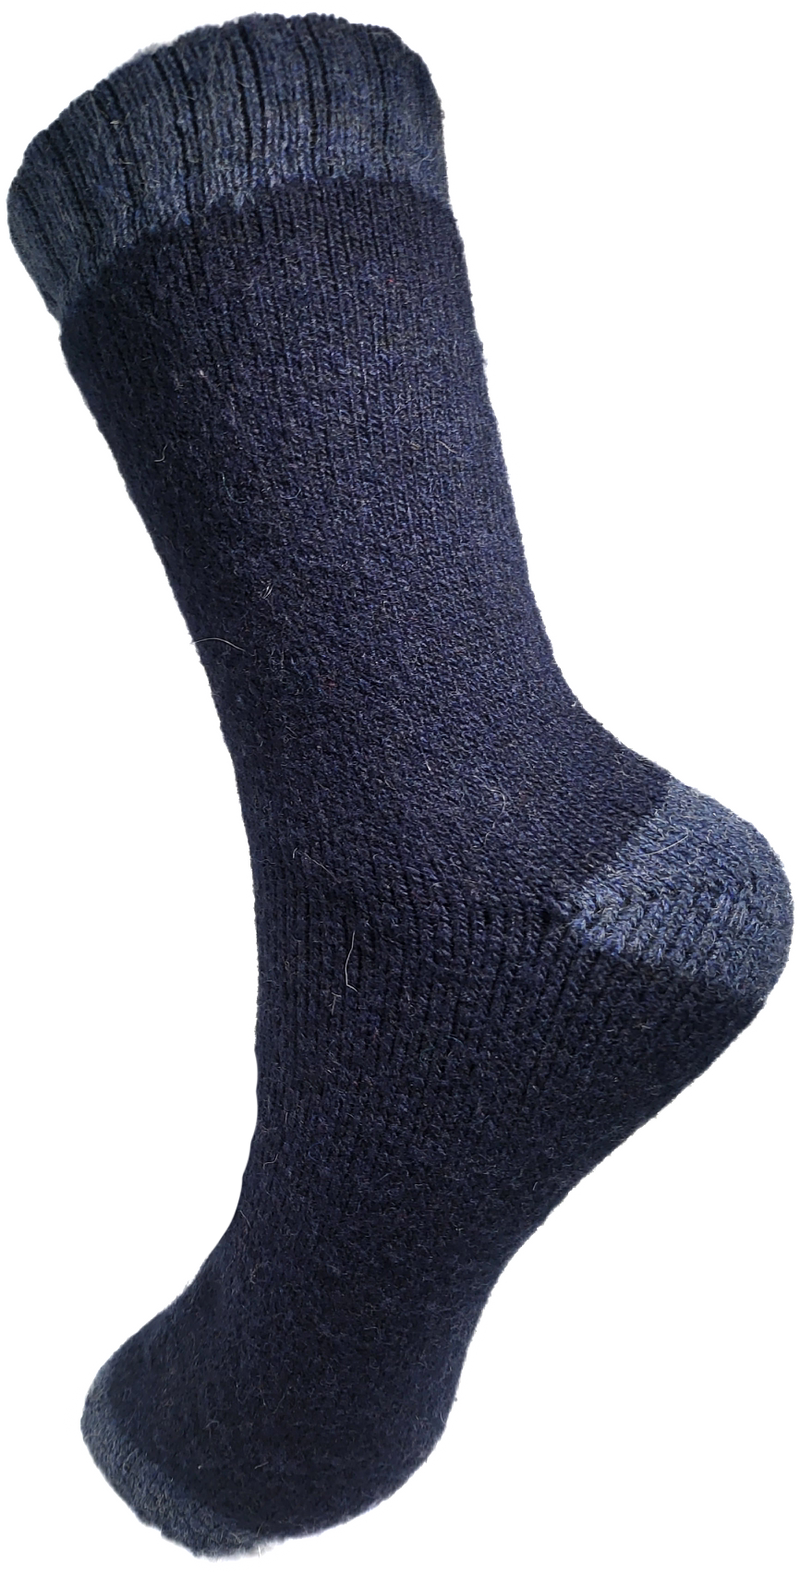 VERA TUCCI BLUE CONTRAST MEN'S THERMAL WINTER SOCKS RMD2305-10-3 NEW FOR AW23!